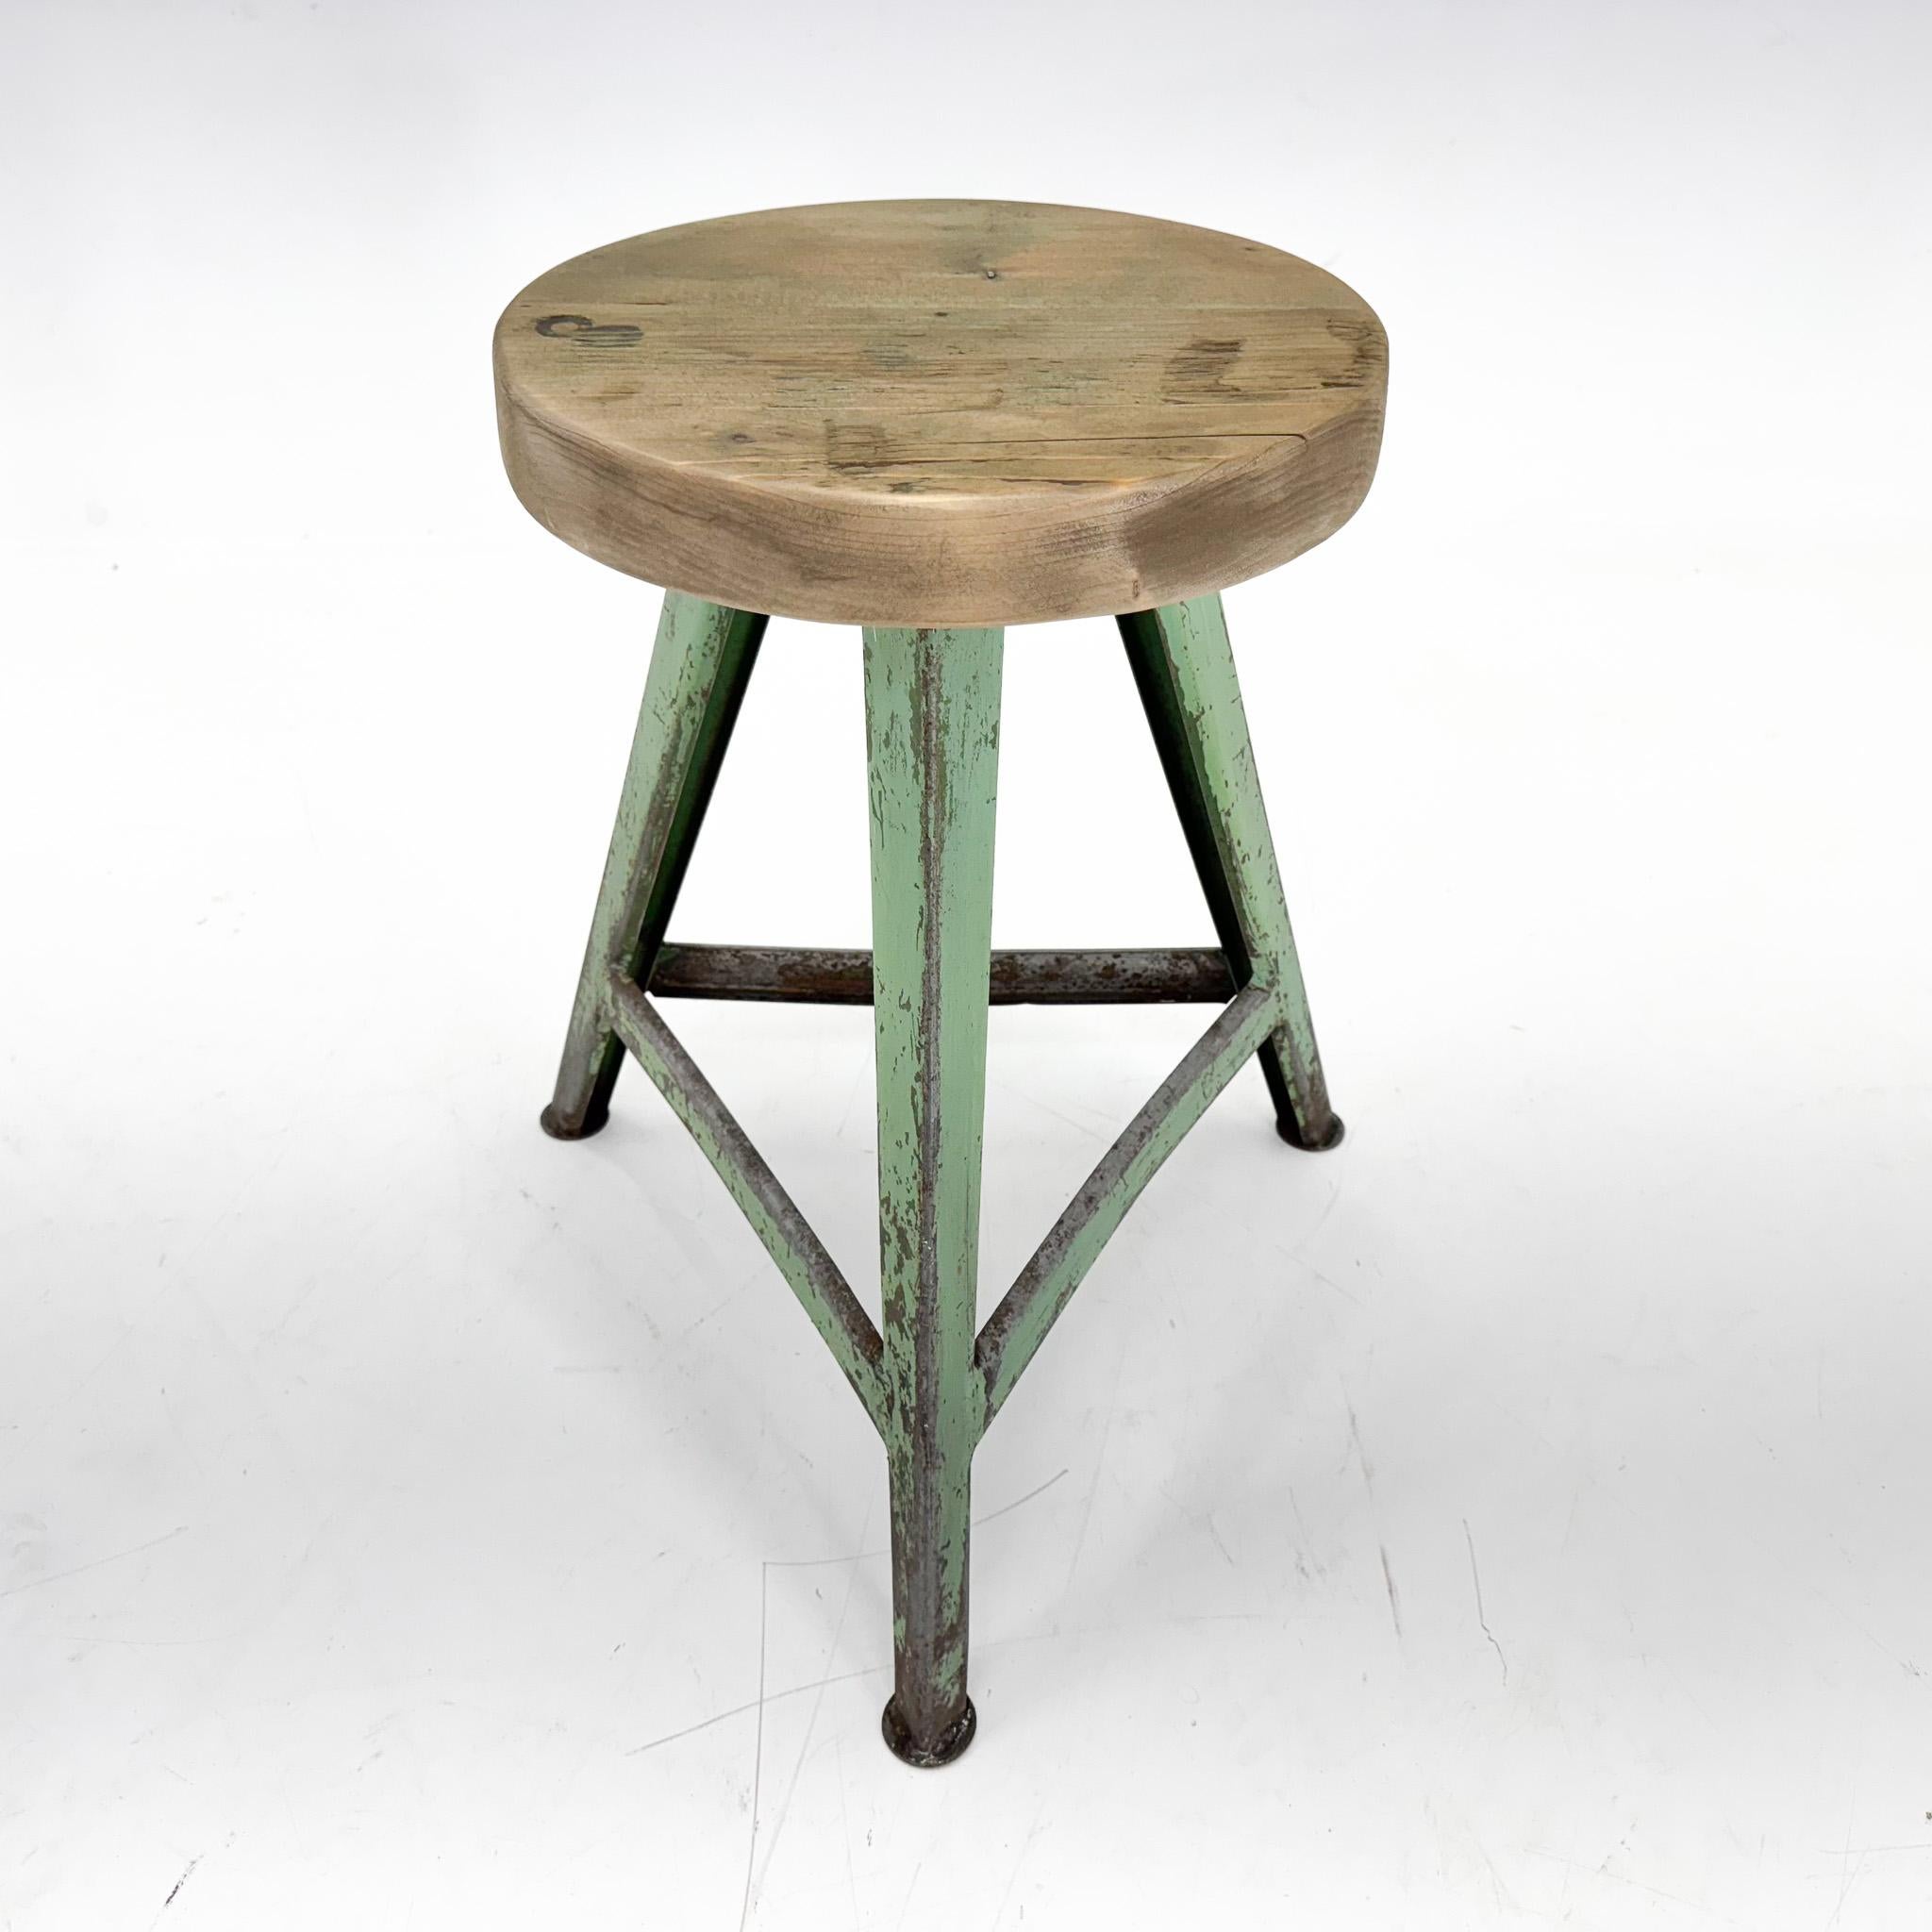 Vintage industrial tripod stool, made of steel and wood. Saved from a factory in former Czechoslovakia. The diameter of the seat is 32 cm. The widest point at the bottom of the legs is 47 cm. 